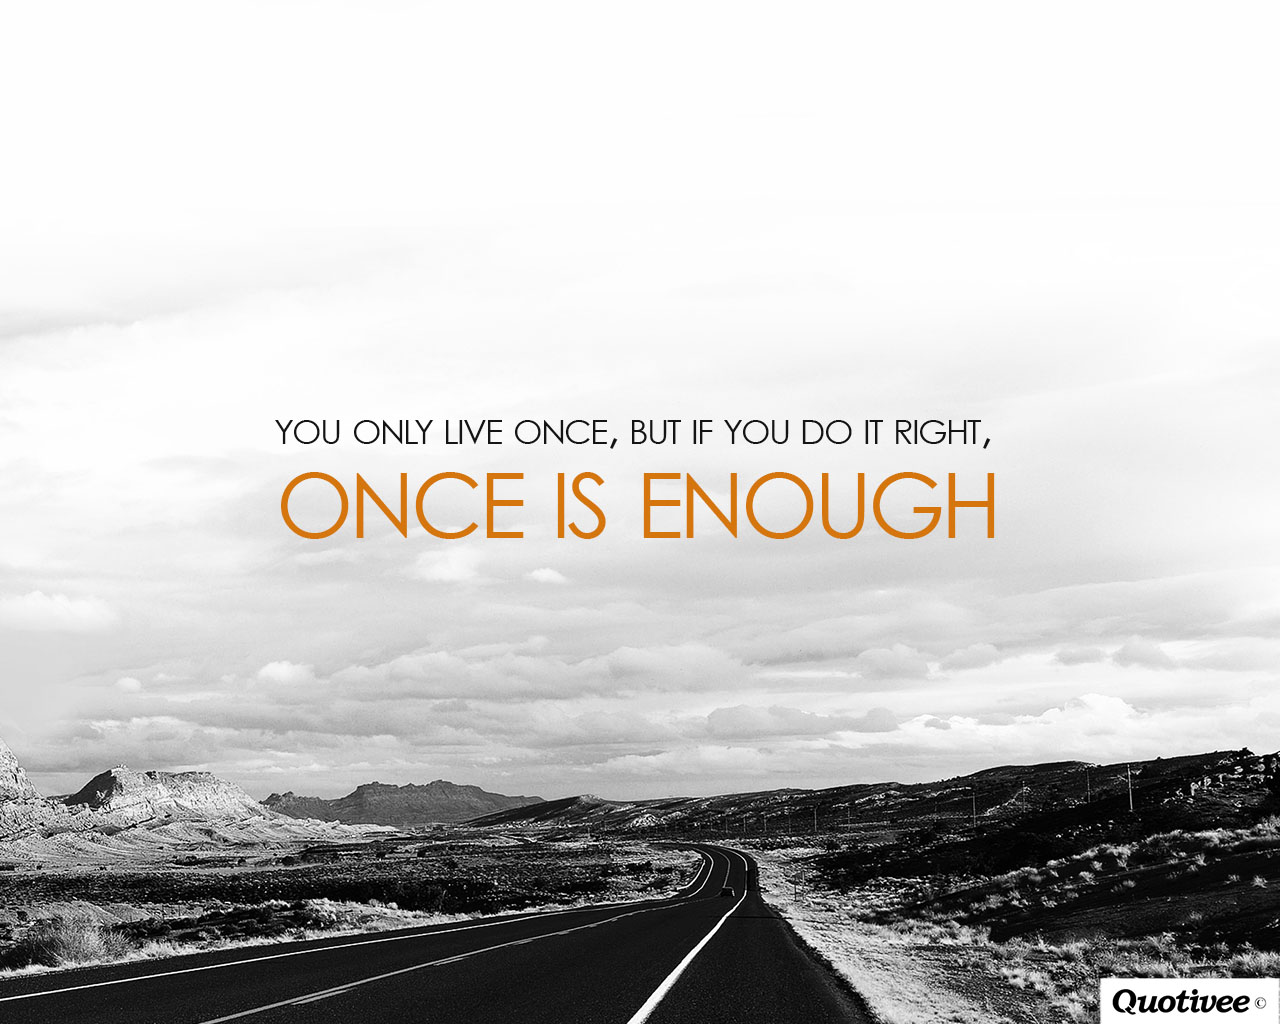 Motivational Wallpaper On Life - We Only Live Once But If We Do It Right Once Is Enough , HD Wallpaper & Backgrounds